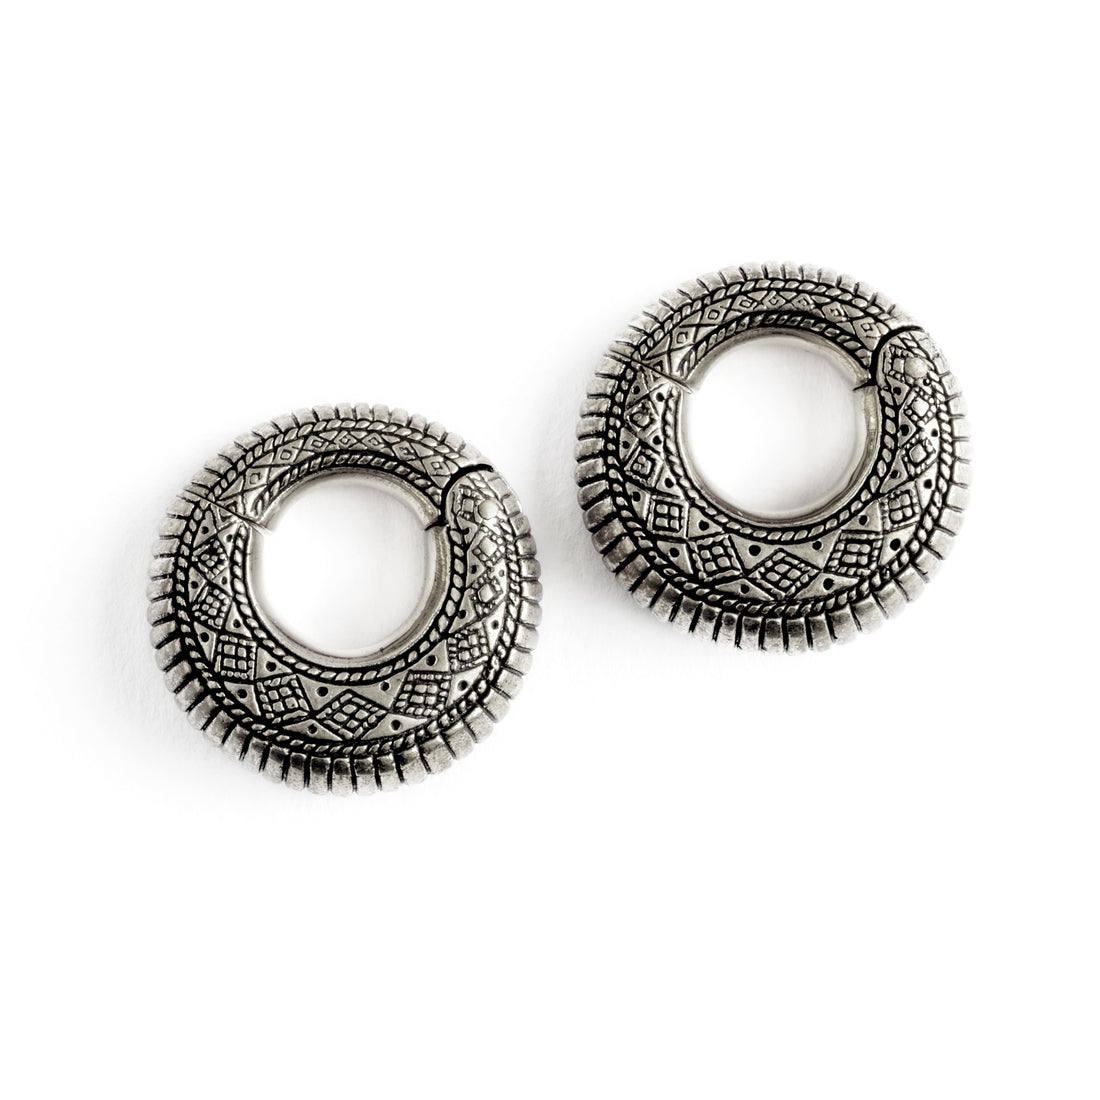 pair of silver brass ear weights hoops with geometric tribal engraved pattern frontal view